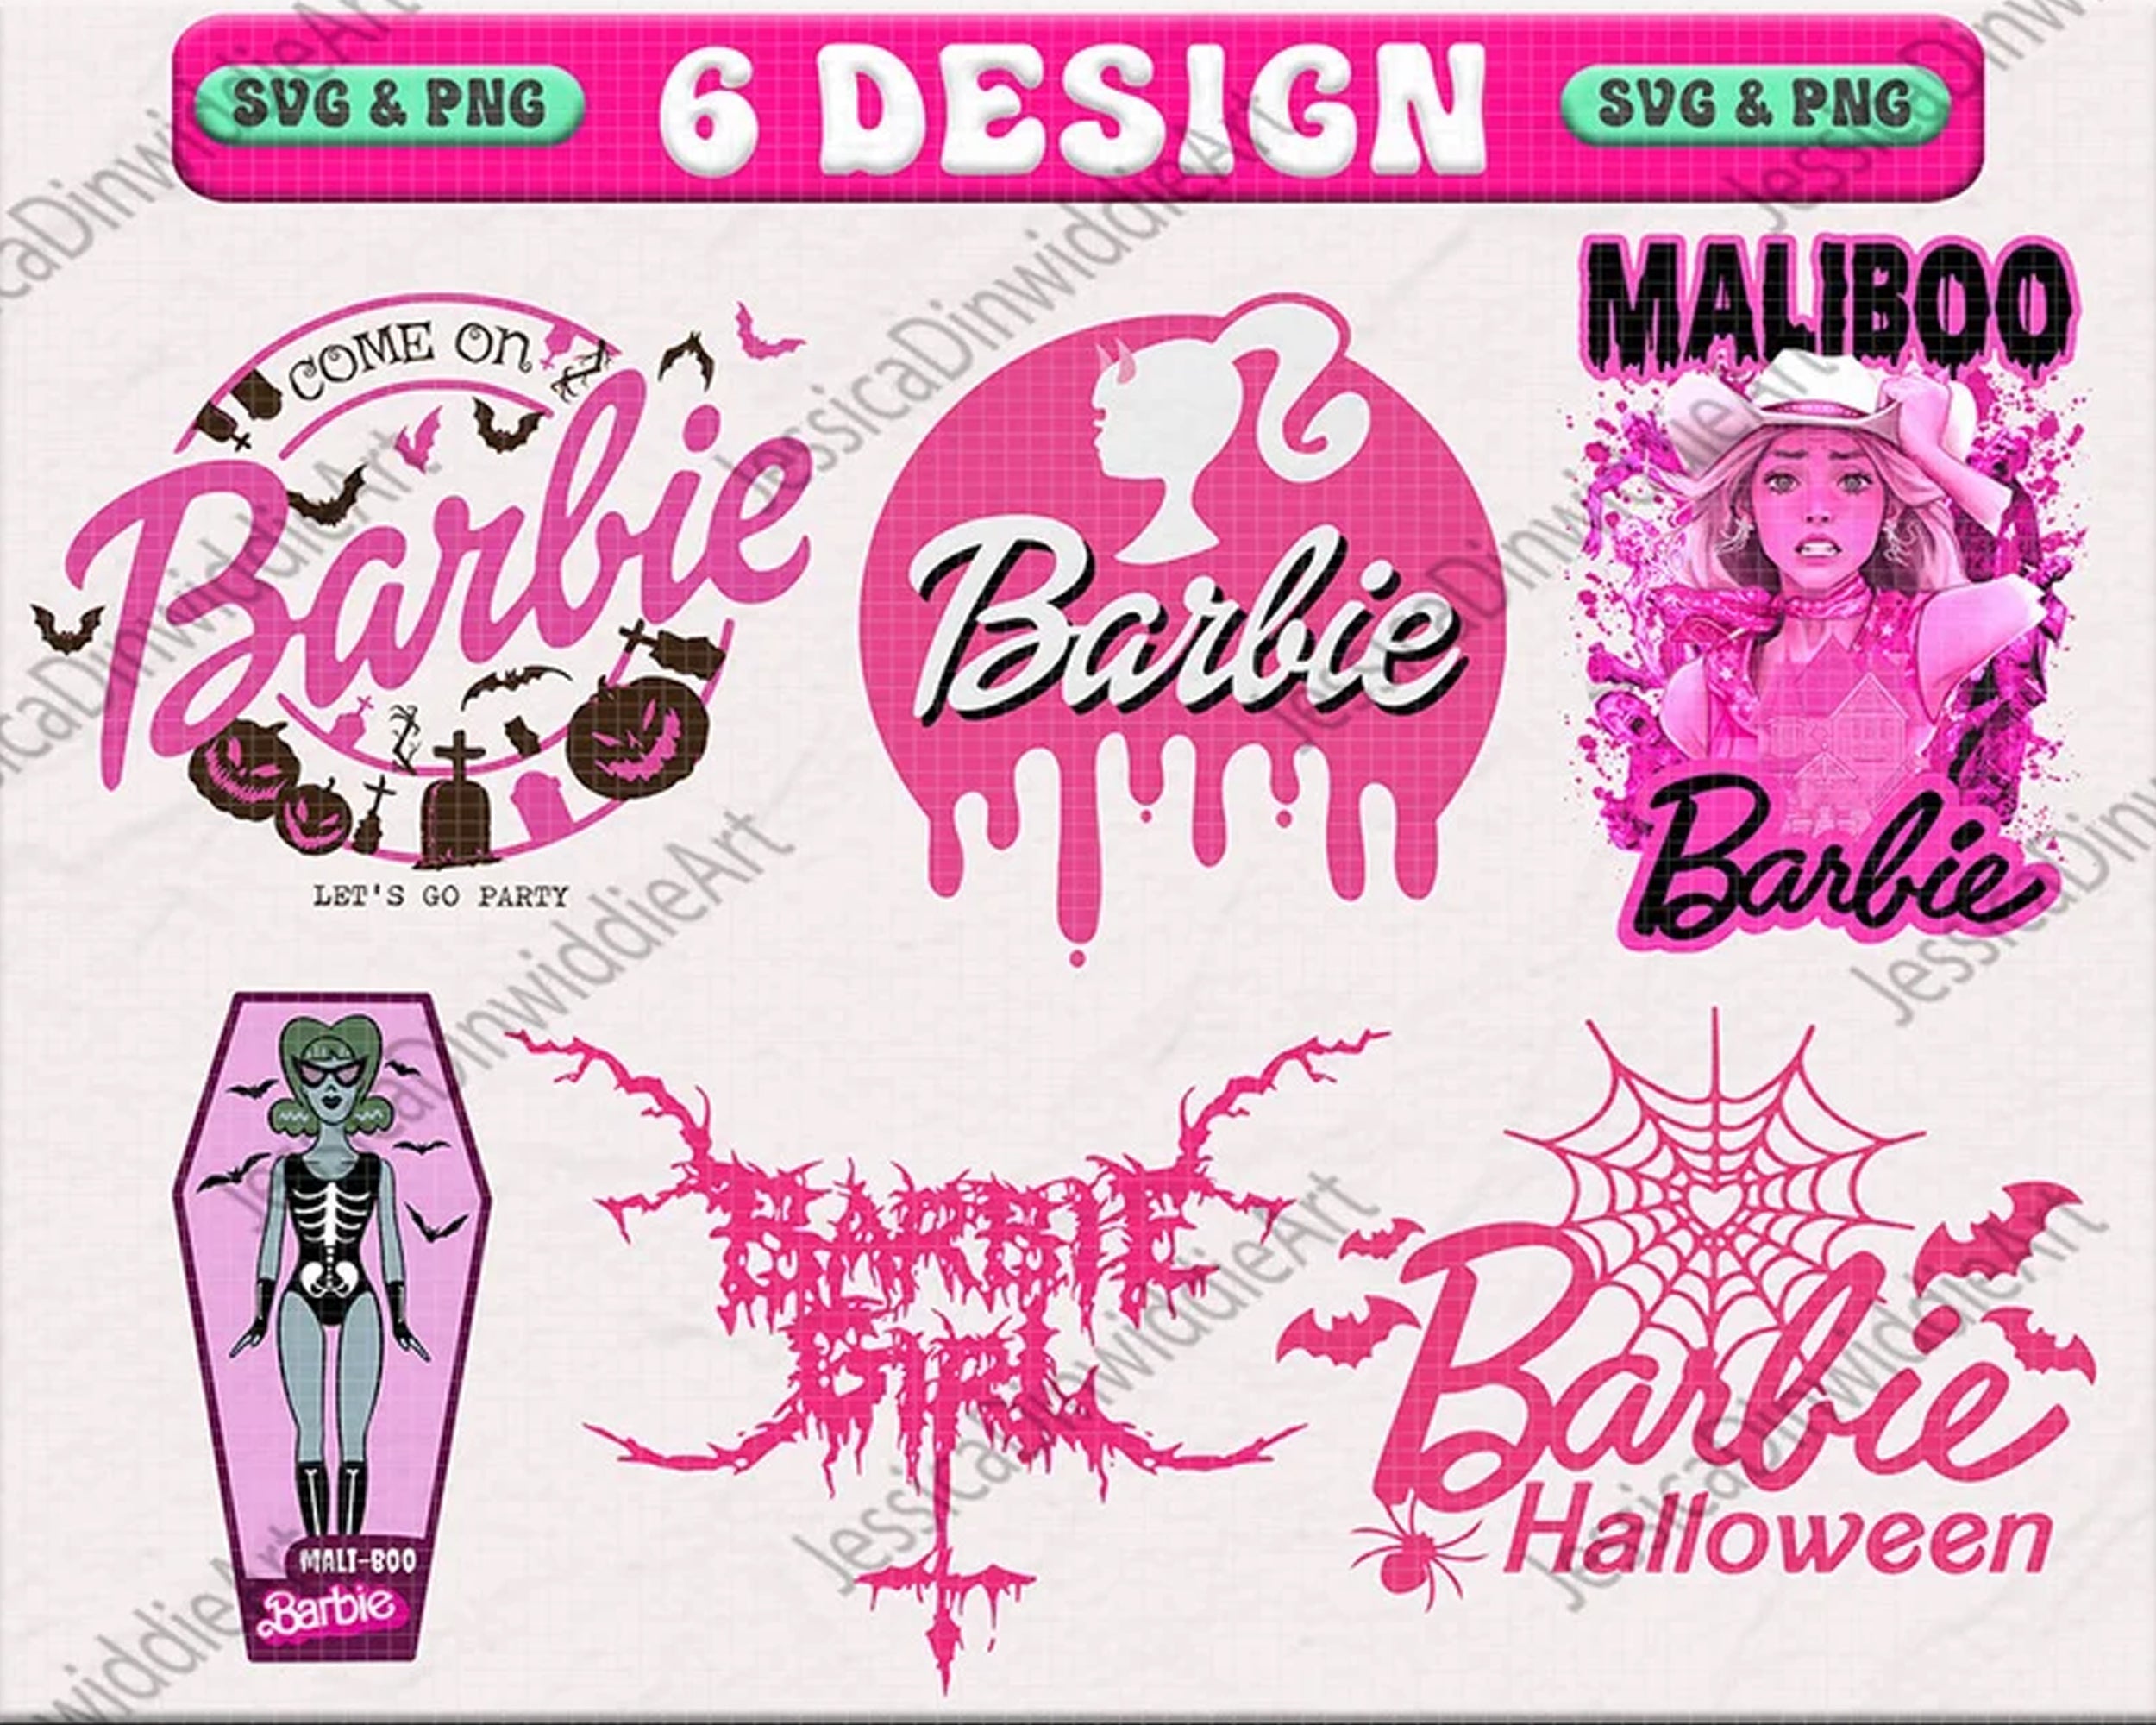 Maliboo Barbie Svg Png, Maliboo Babe, Halloween, Sublimation, 90s Aesthetic Toy, Y2K Cali Style, Let's Go Party, Instant Download